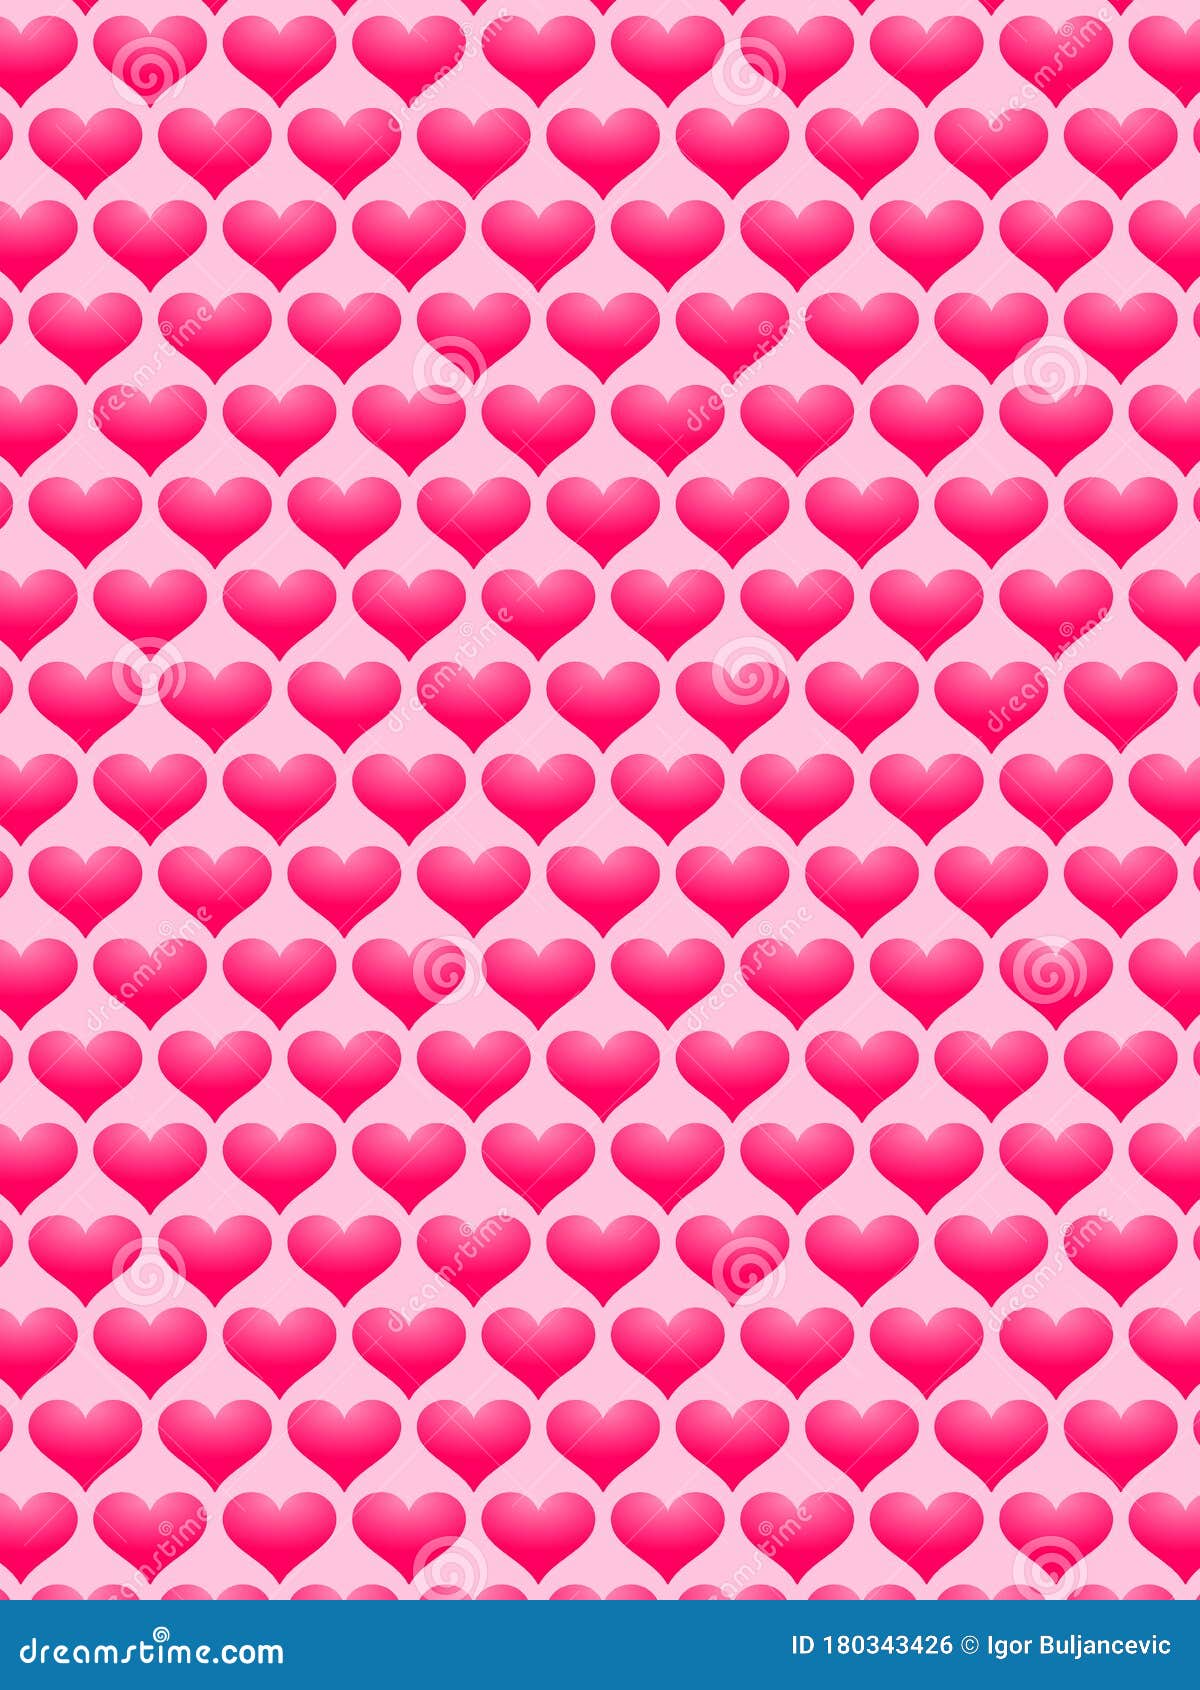 Love Background with Hearts. Heart Pattern. Pink Hearts on Pinkish  Background. Stock Illustration - Illustration of vibrant, amour: 180343426